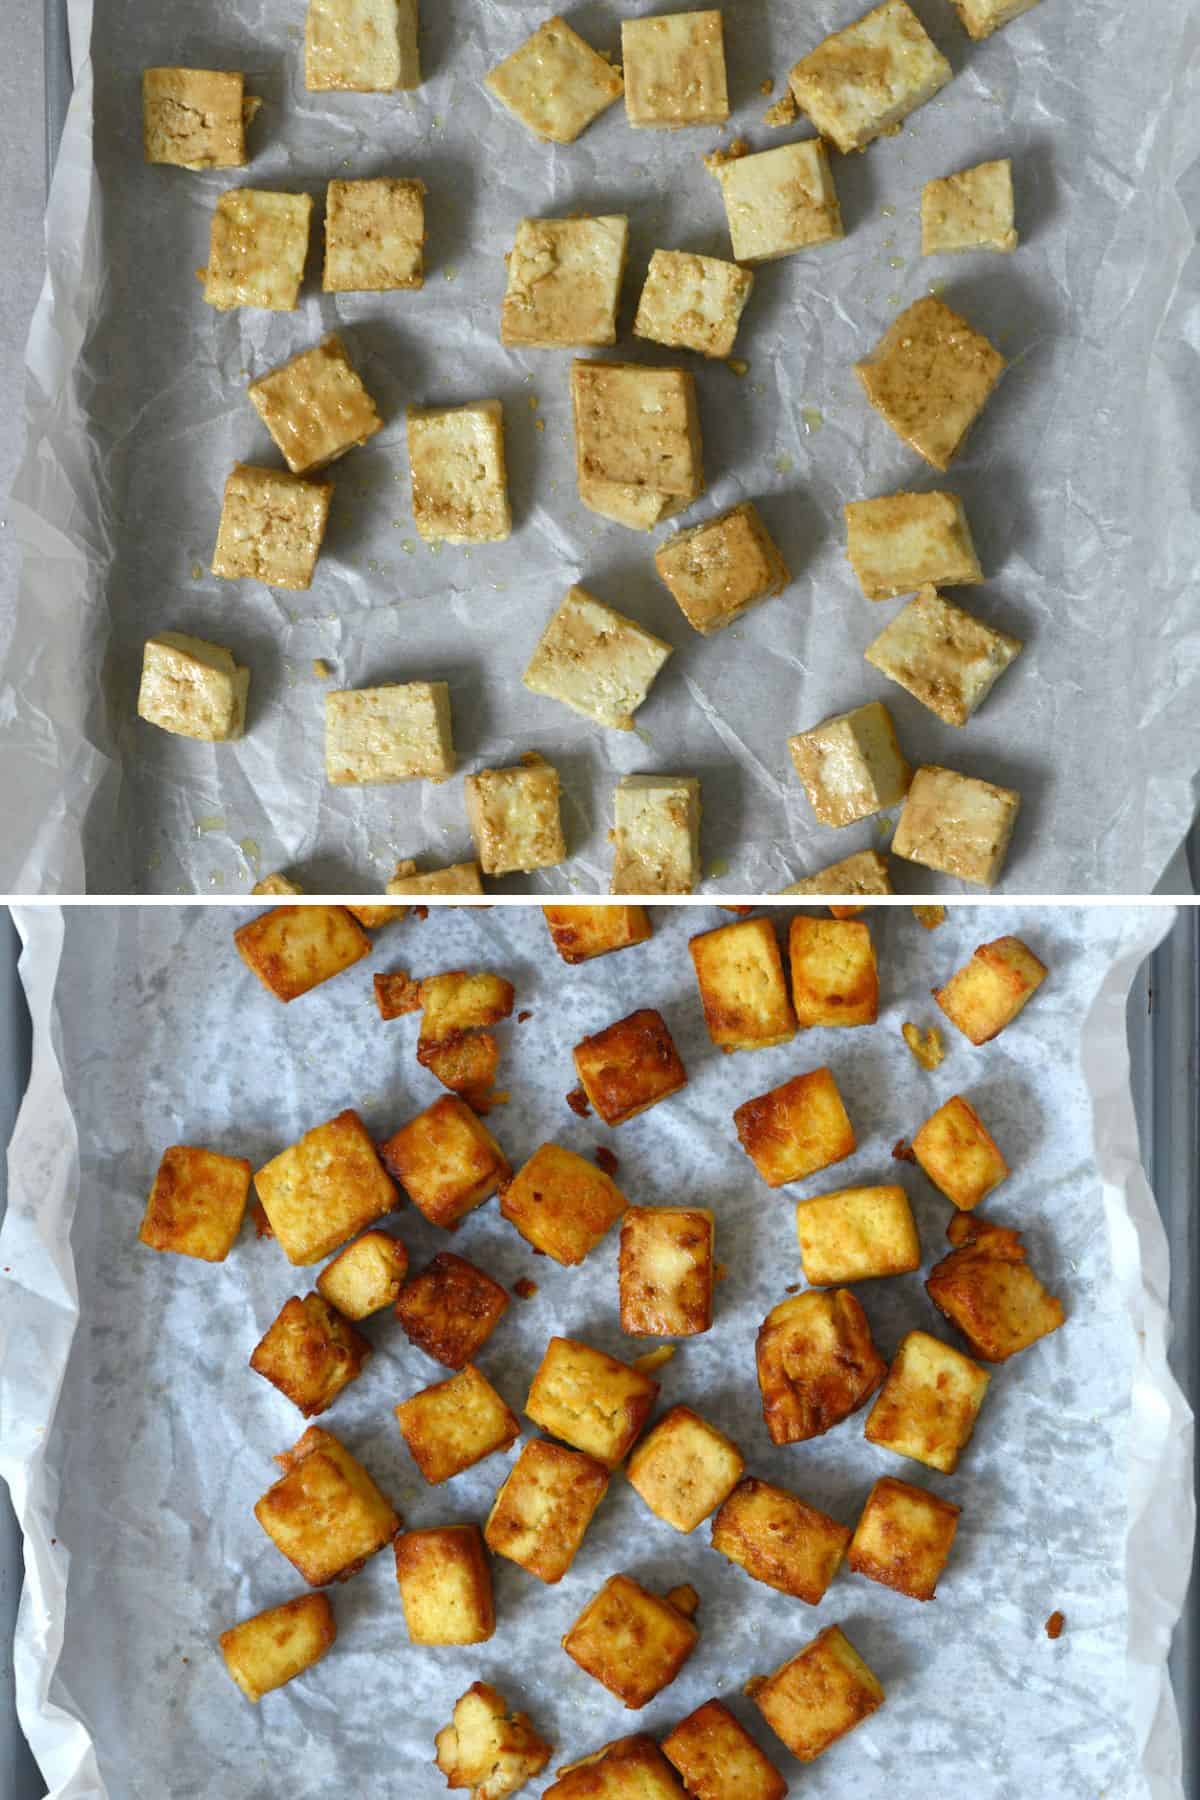 Before and after baking crispy tofu